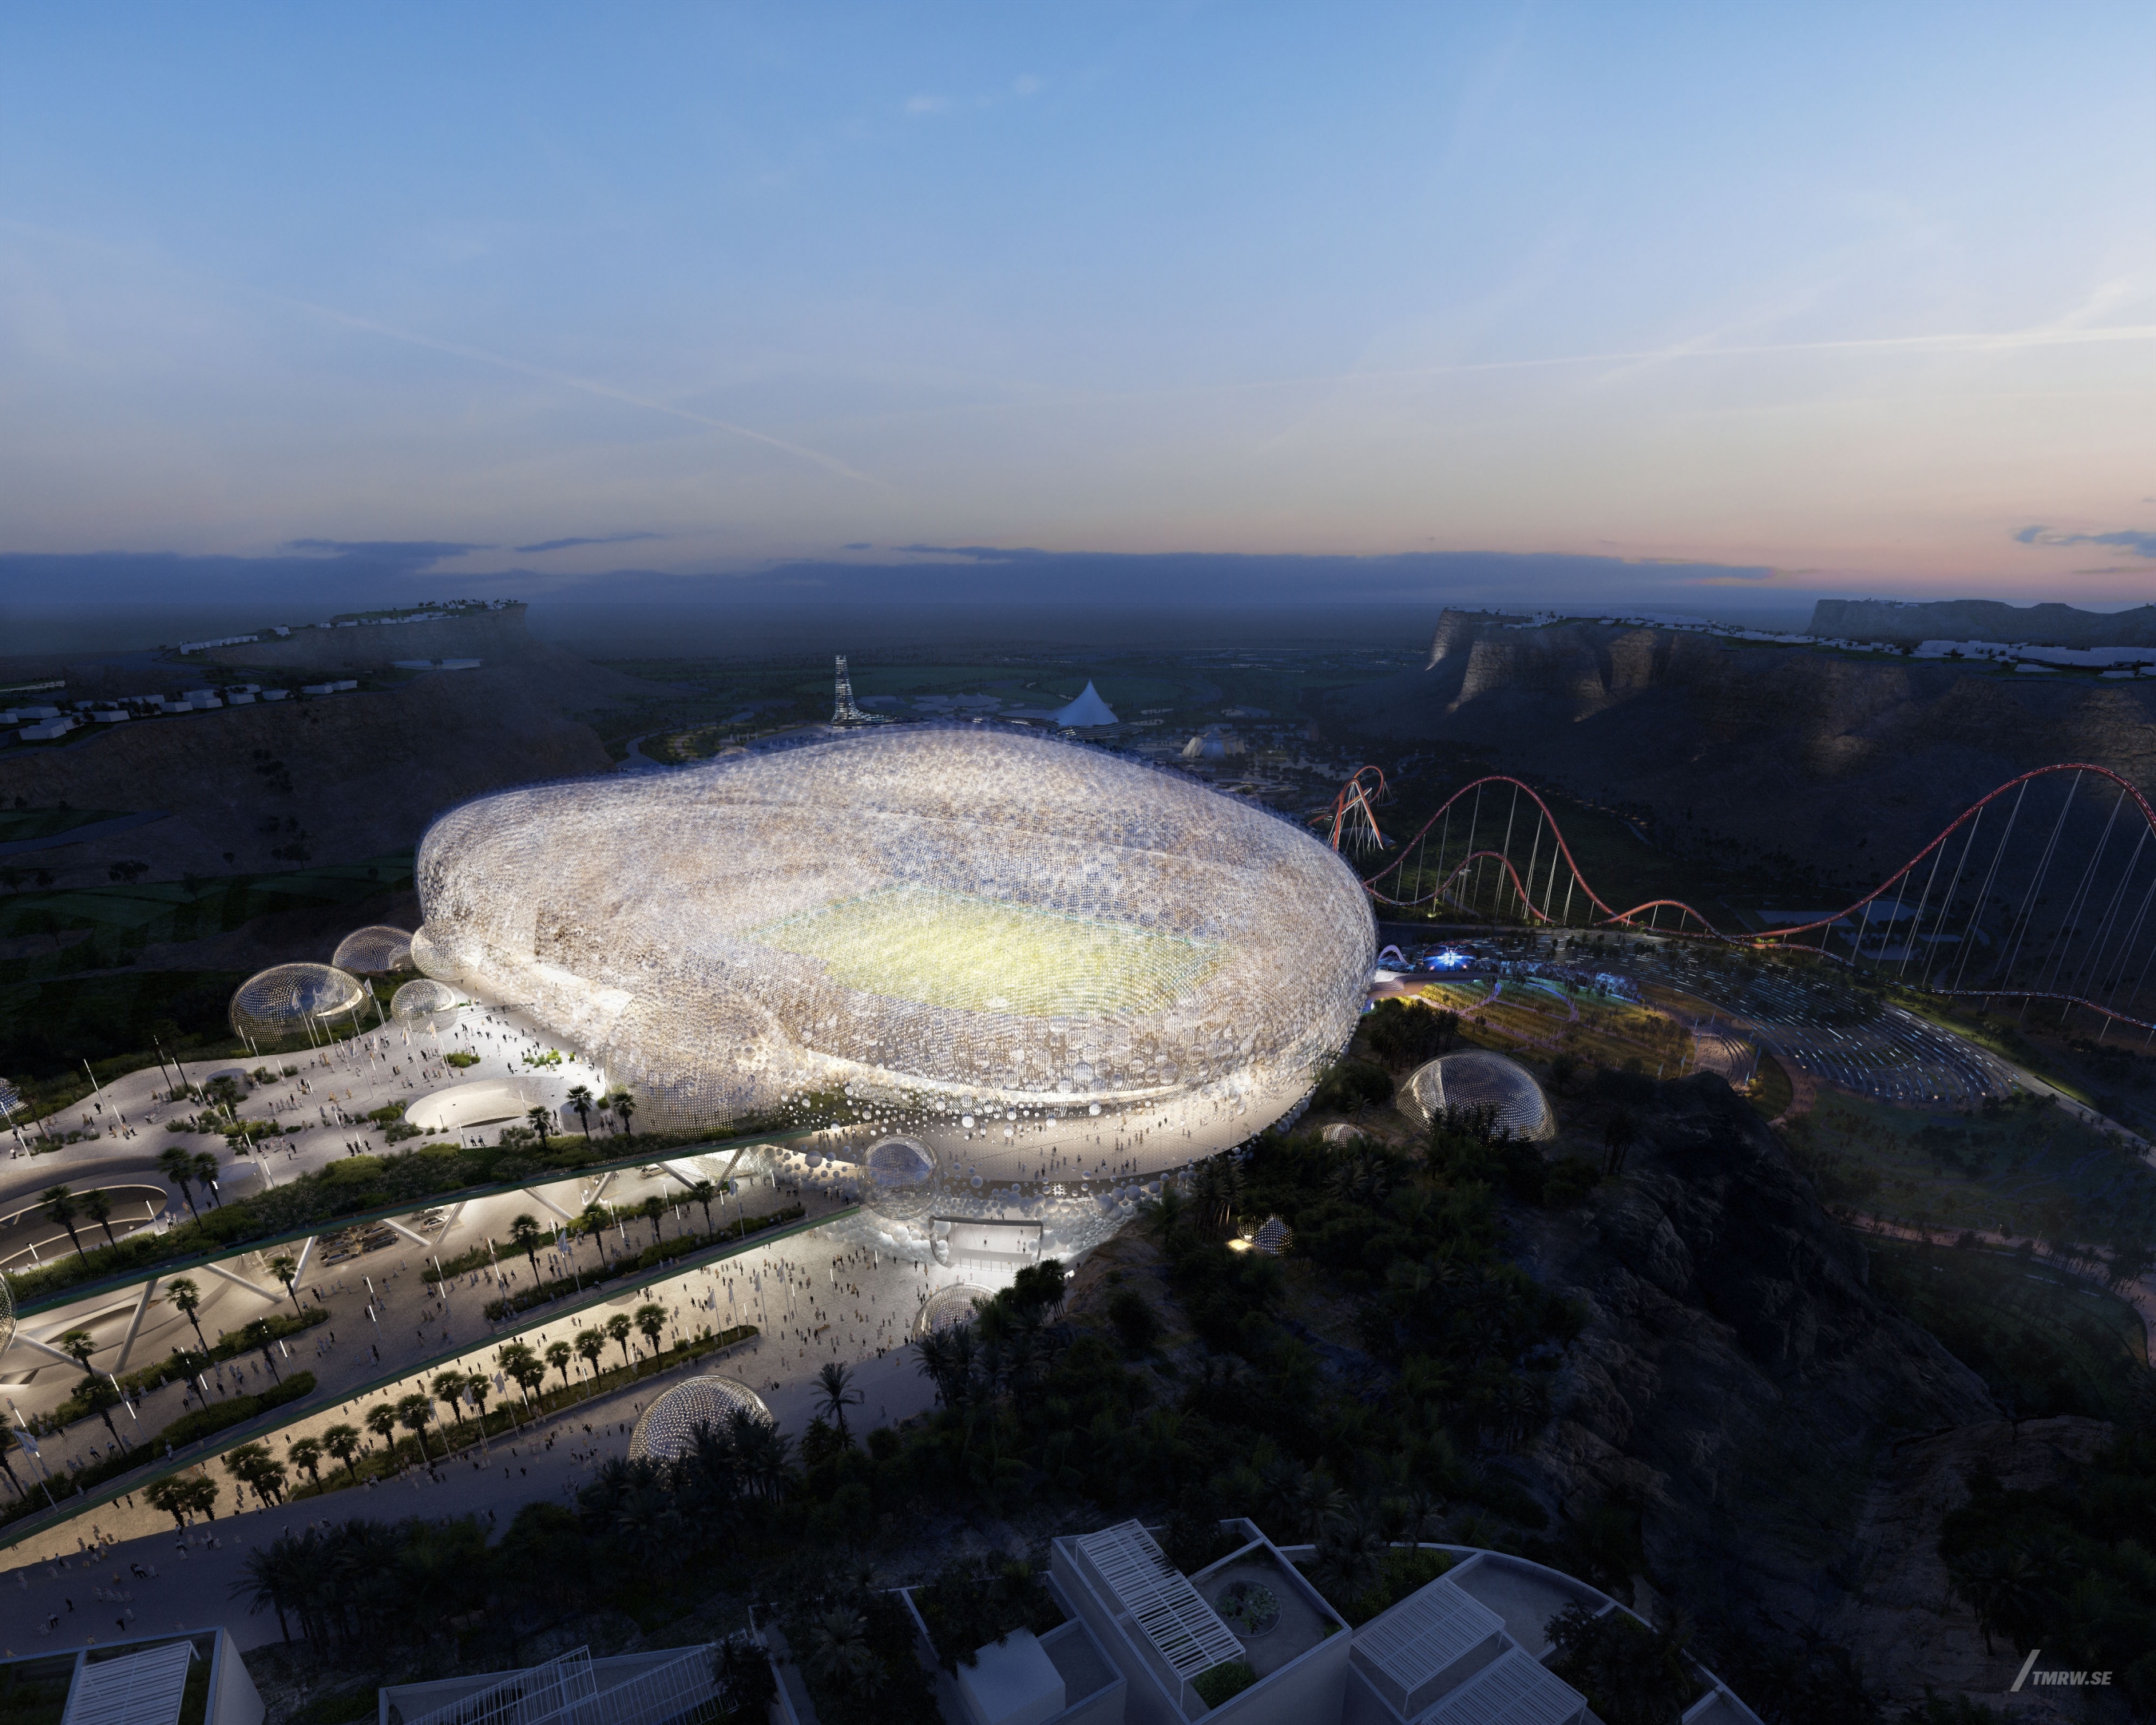 Architectural visualization of Qiddiya for HOK. An image of a soccer arena at night from semi aerial view.